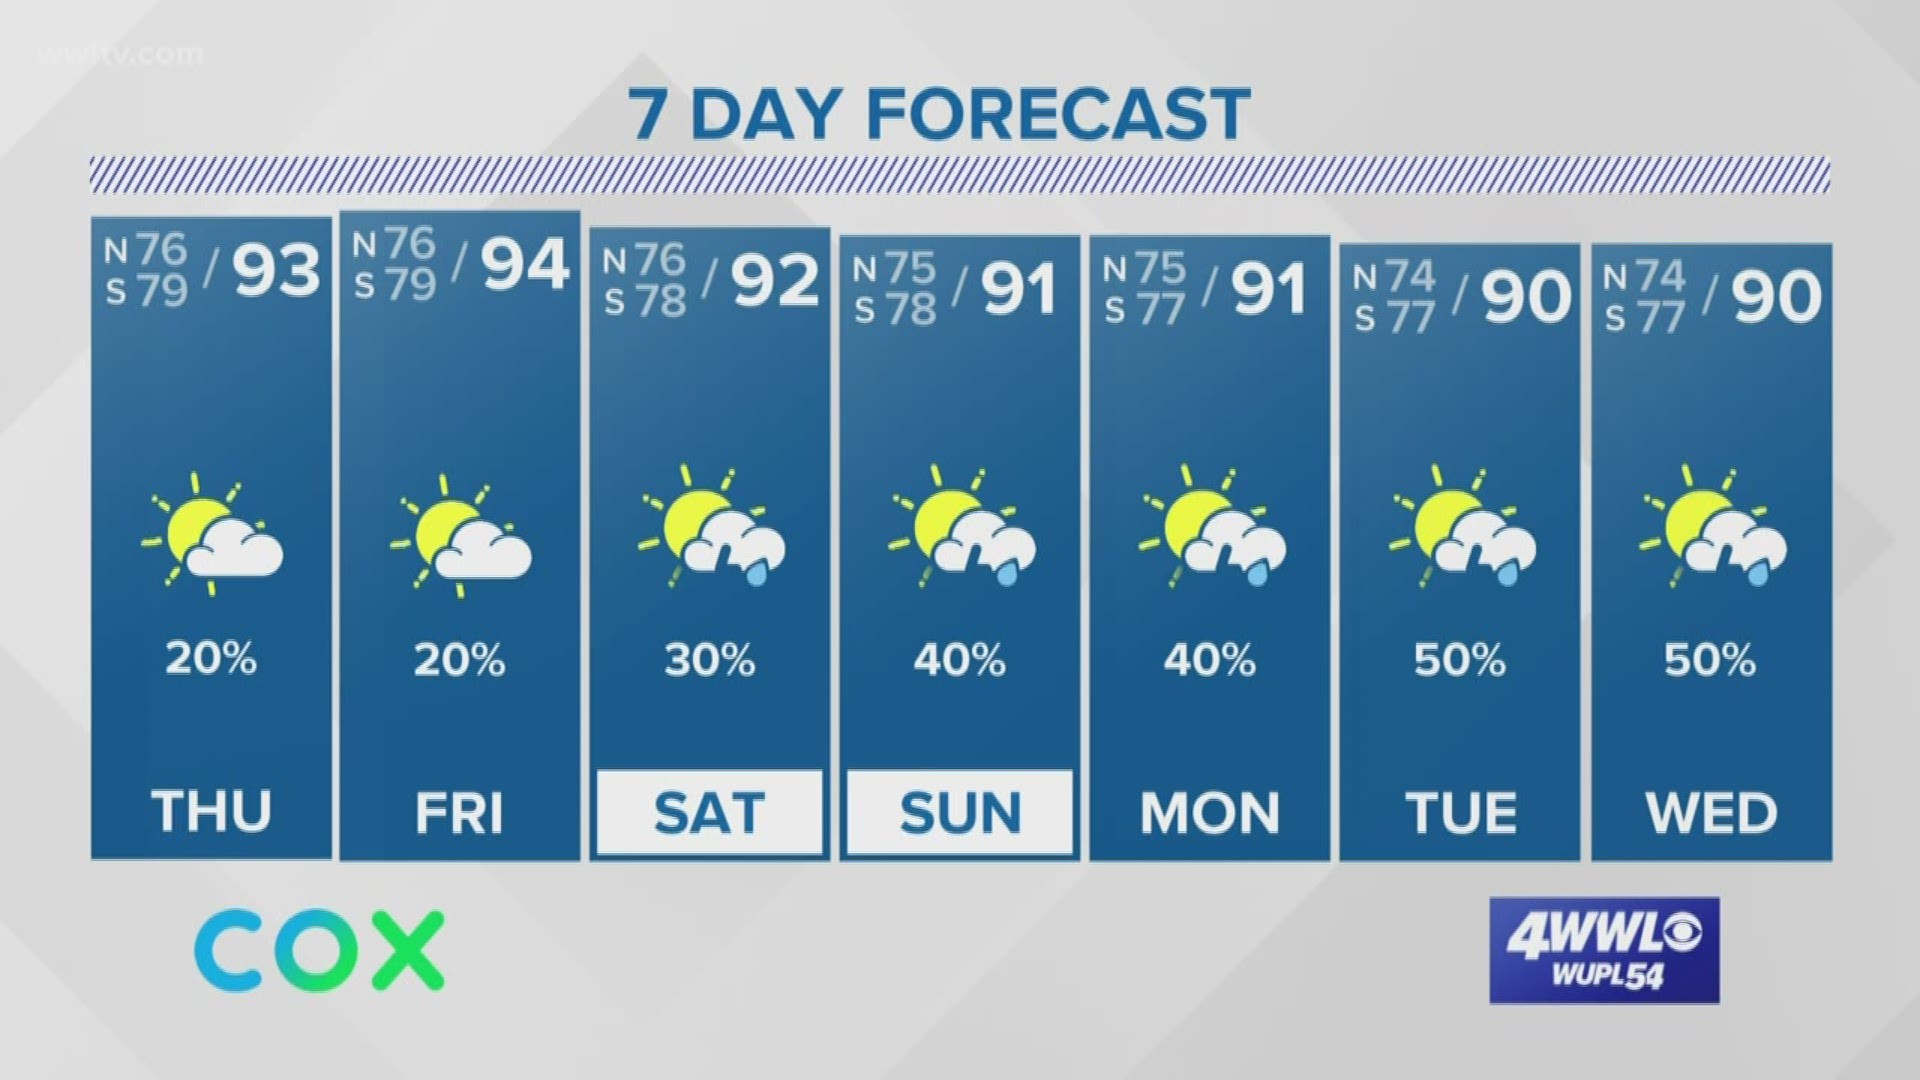 Meteorologist Alexandra Cranford has the forecast at 10 p.m. on Wednesday, July 17, 2019.